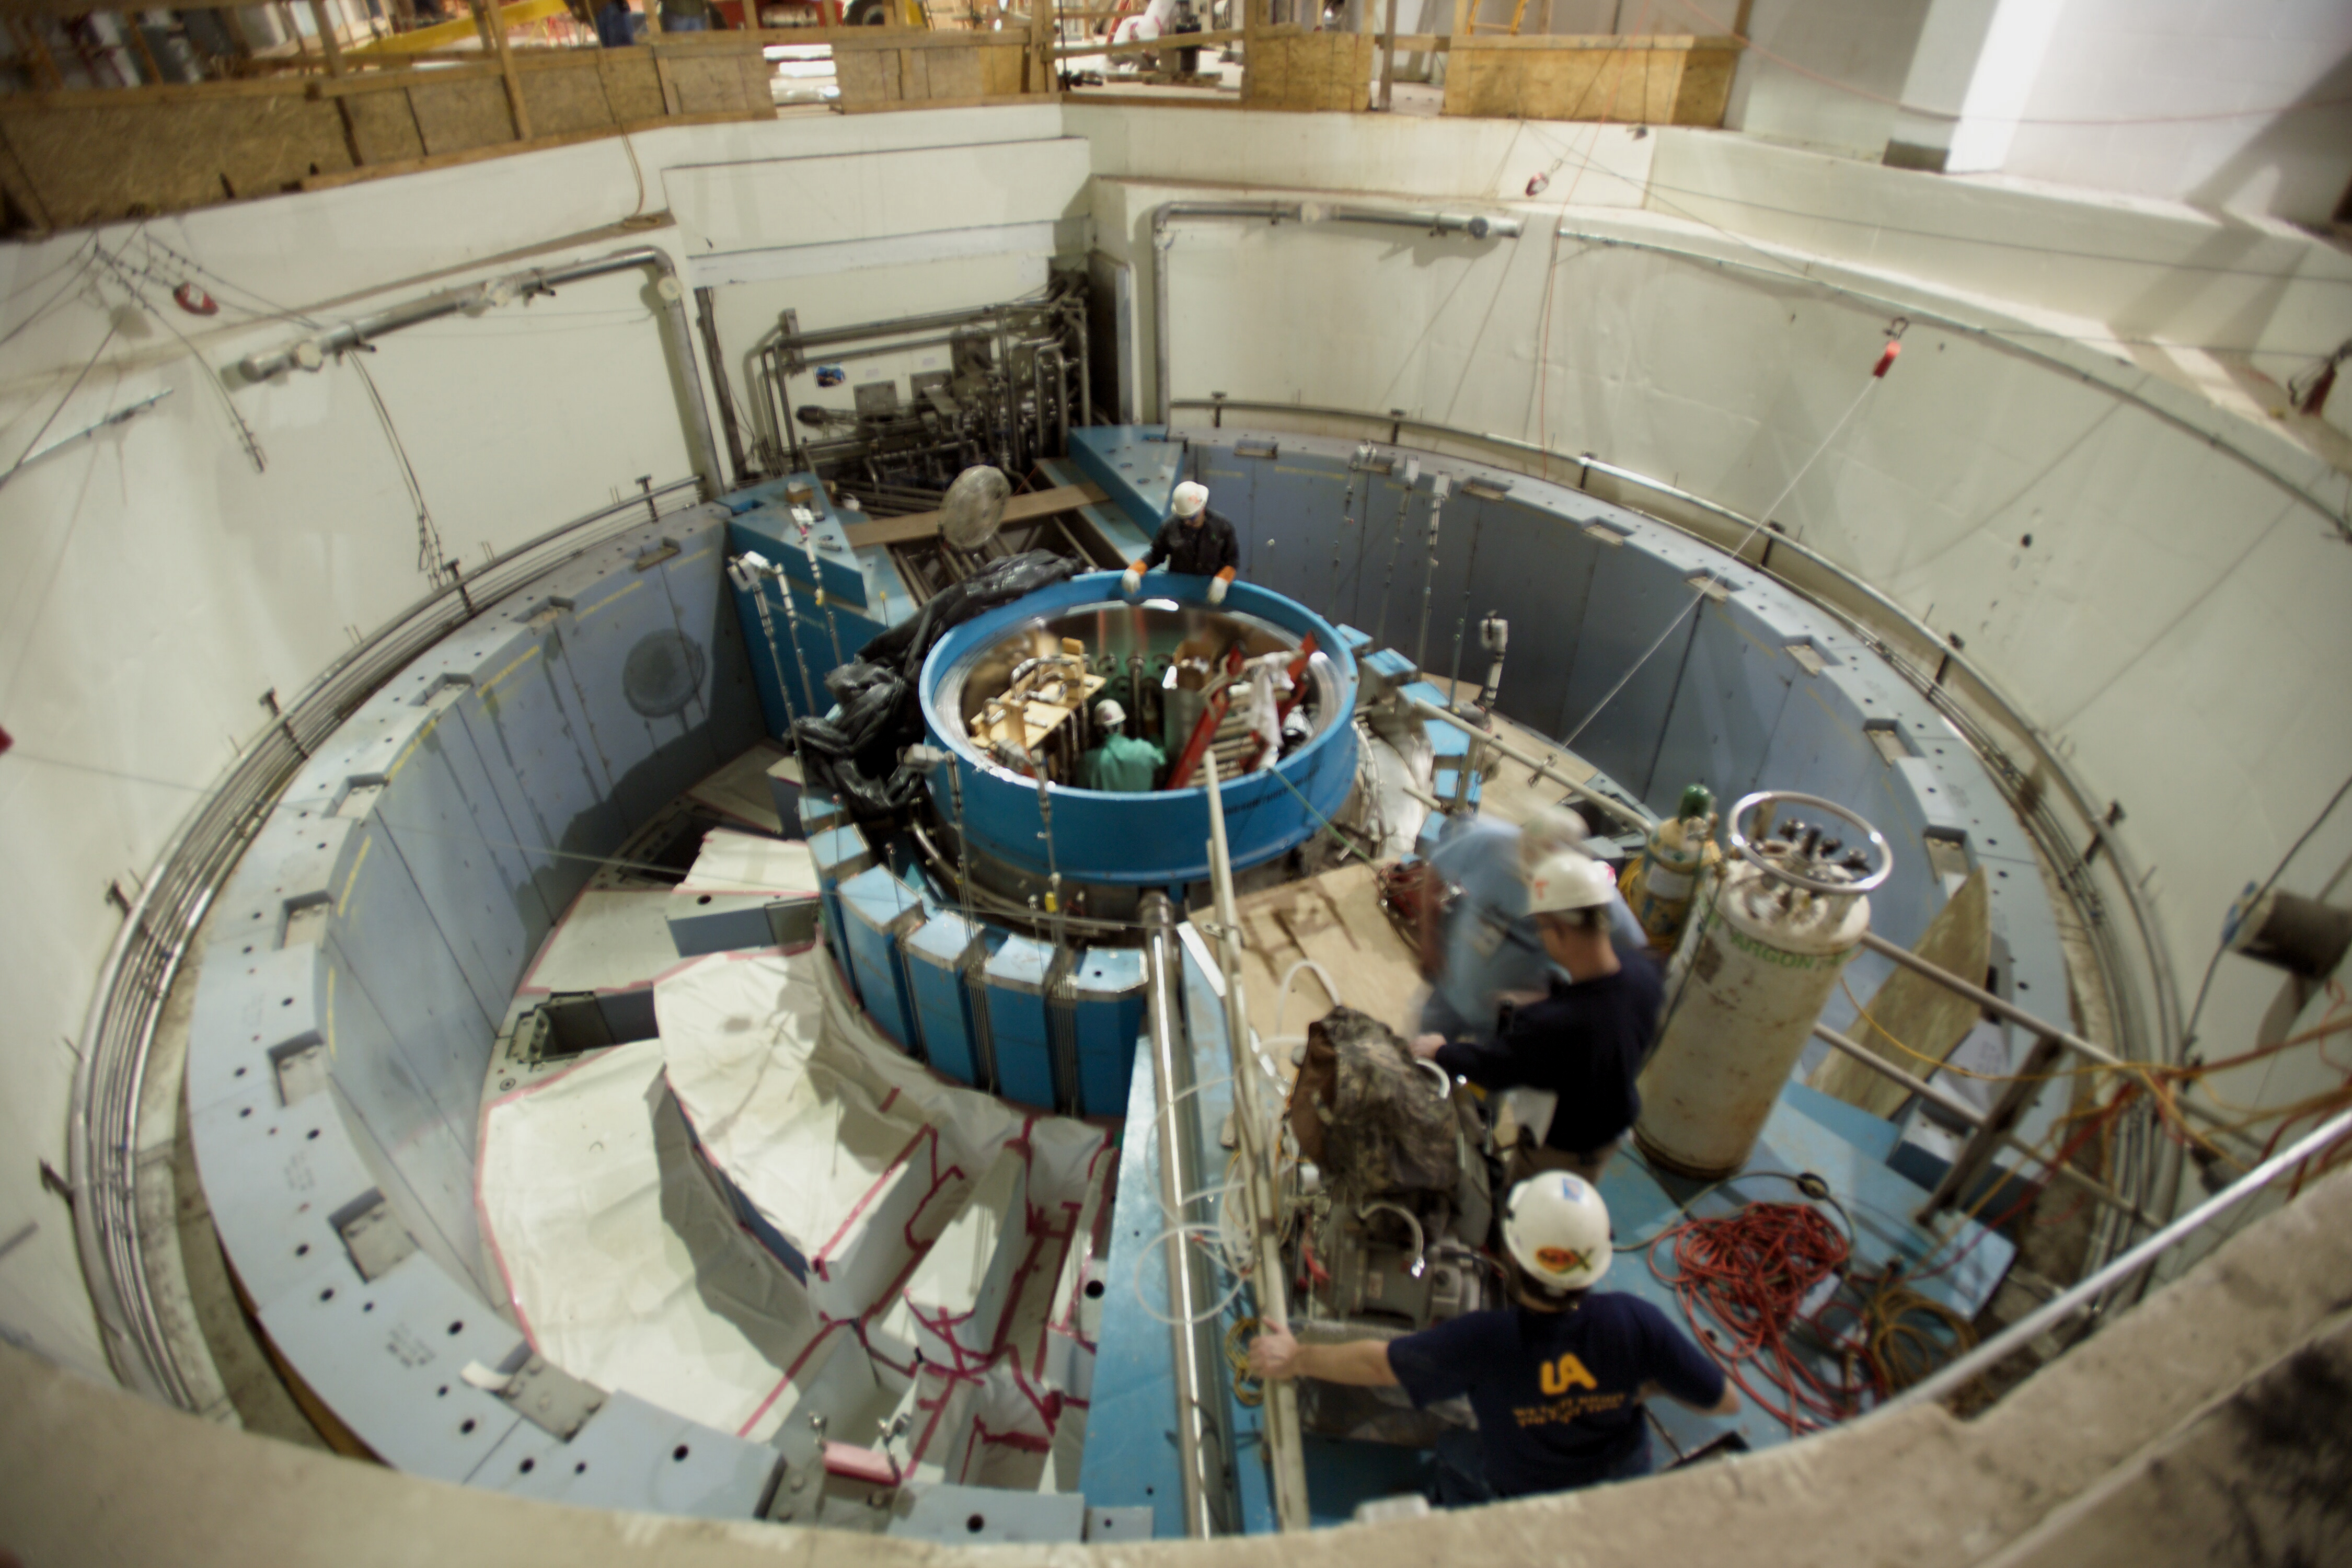 From 2005, installation nearing completion of the target building interior where neutrons are created via spallation and sent to the surrounding instruments for research. (Credit: ORNL/Curtis Boles)  